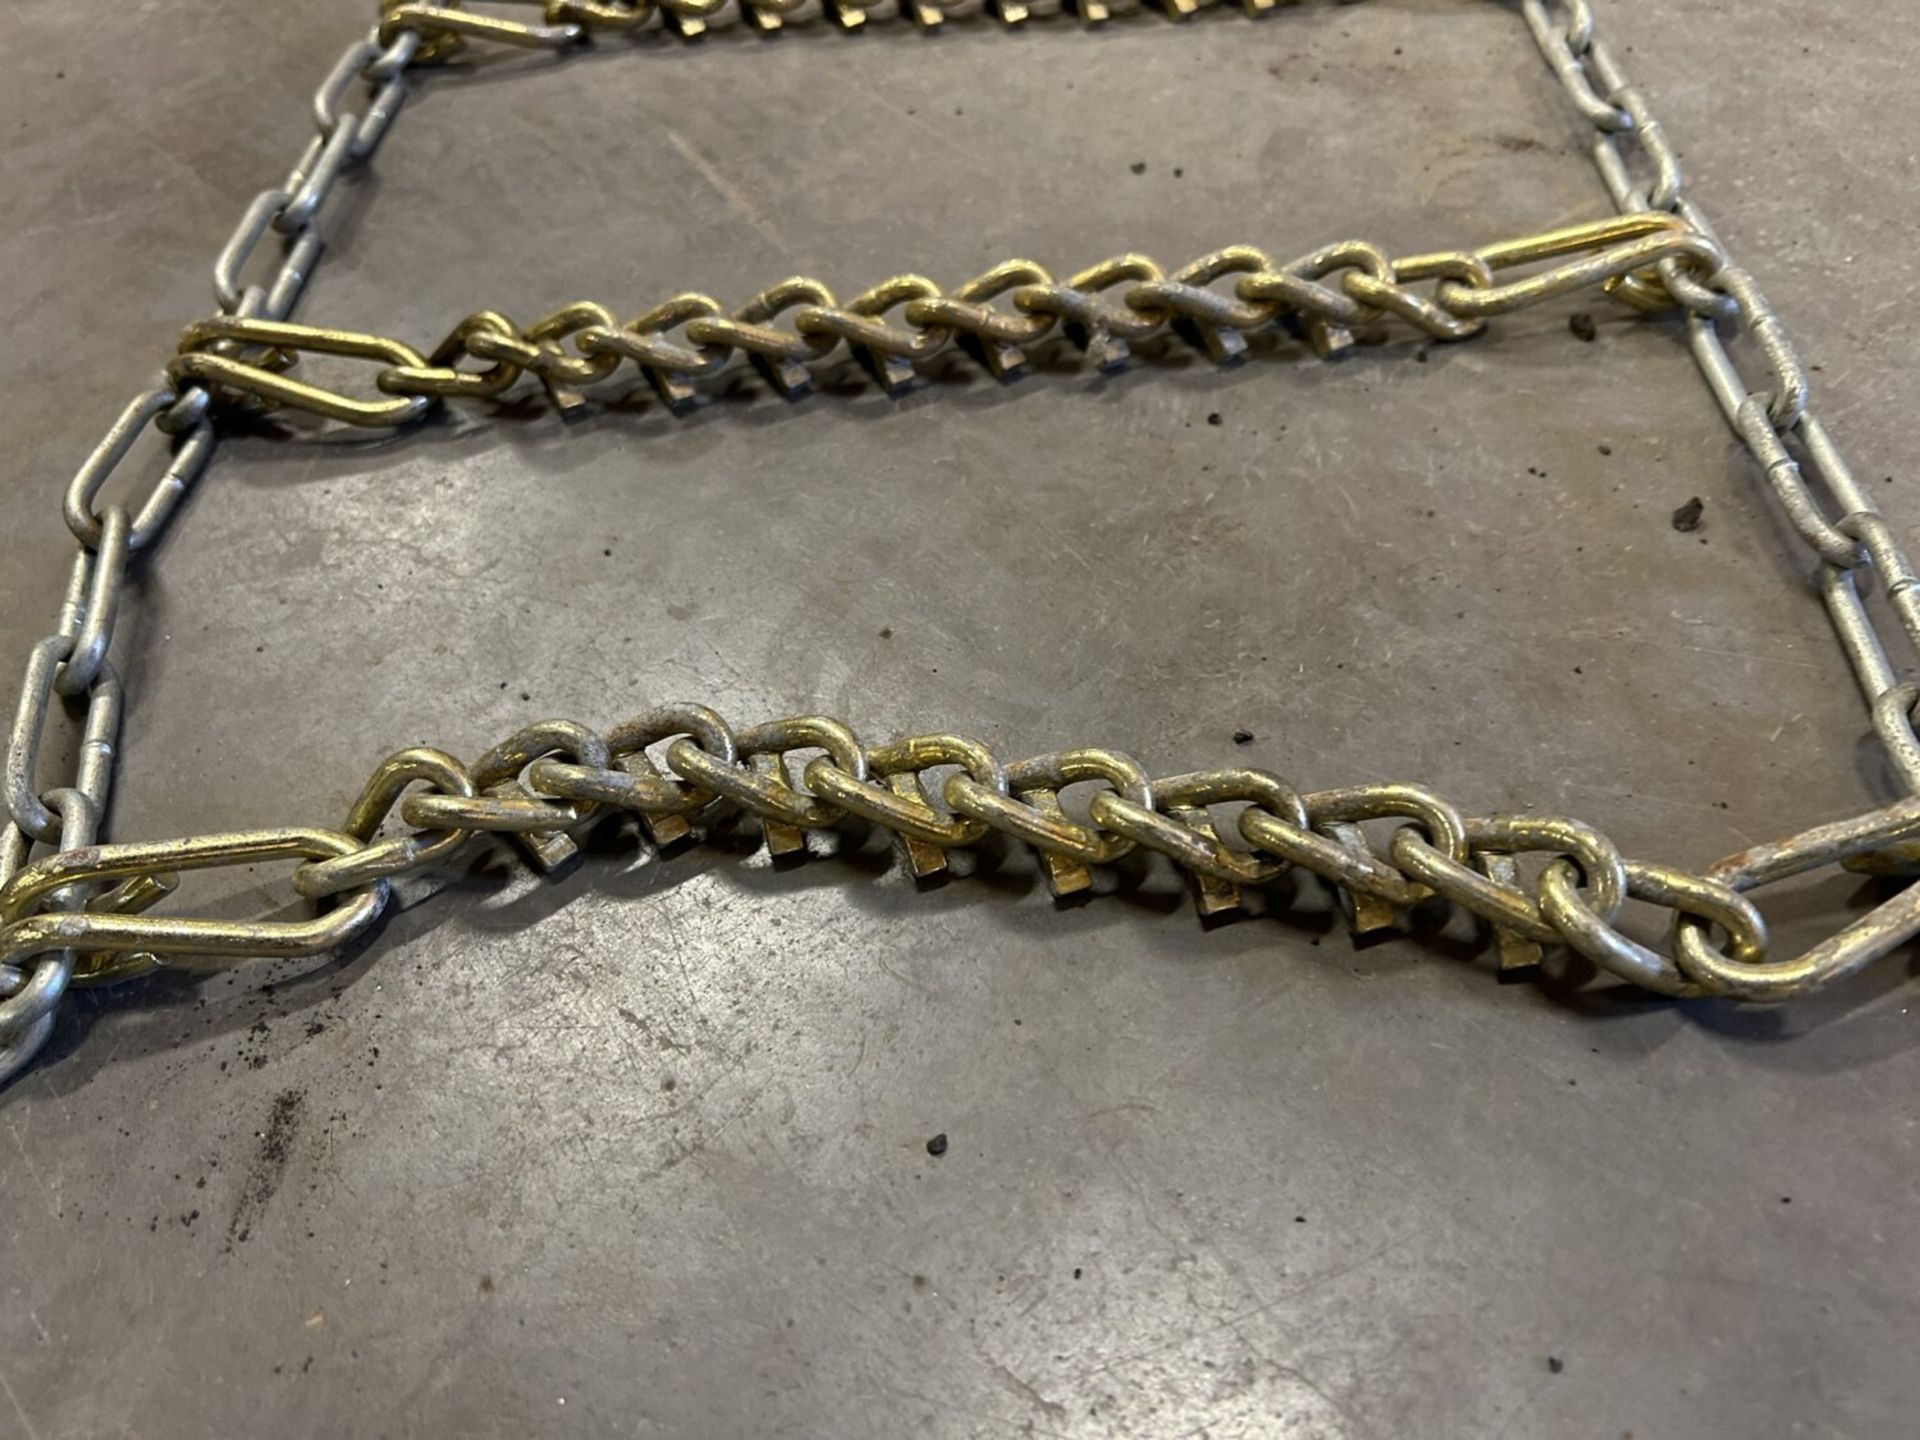 TIRE CHAINS - Image 3 of 4